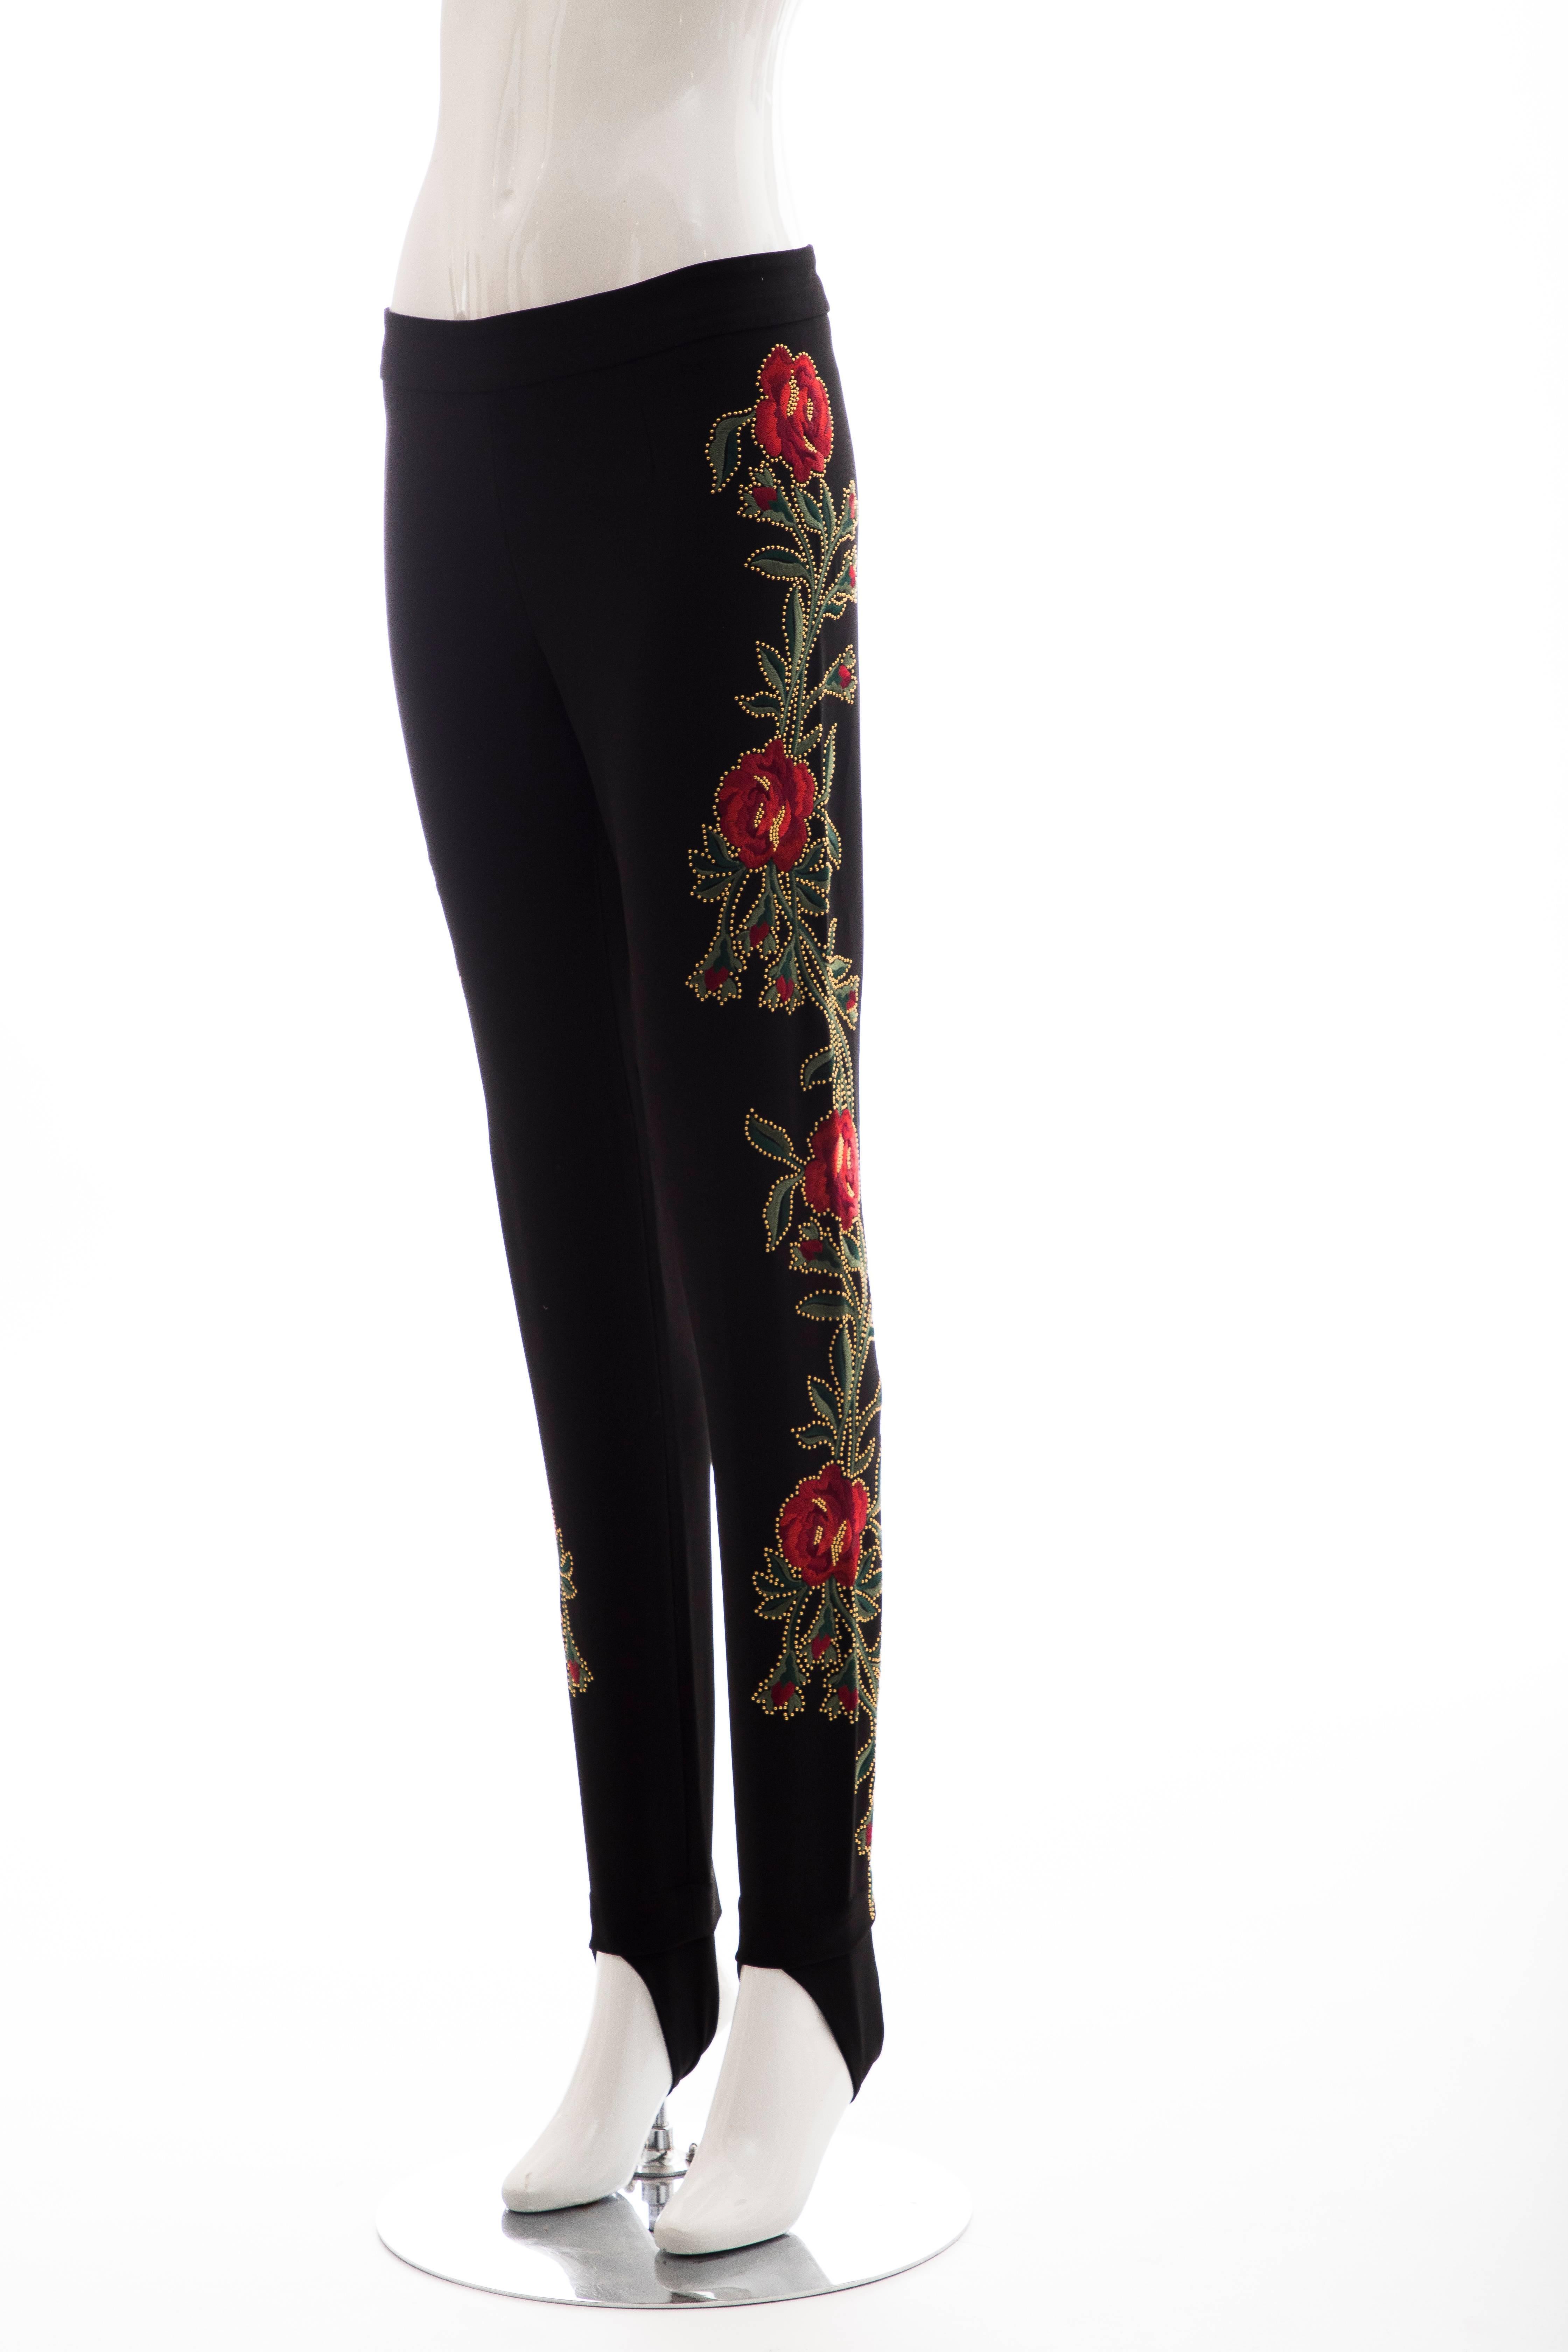 Moschino Runway Black Floral Embroidered & Gold Studded Pants, Fall 2013 In New Condition For Sale In Cincinnati, OH